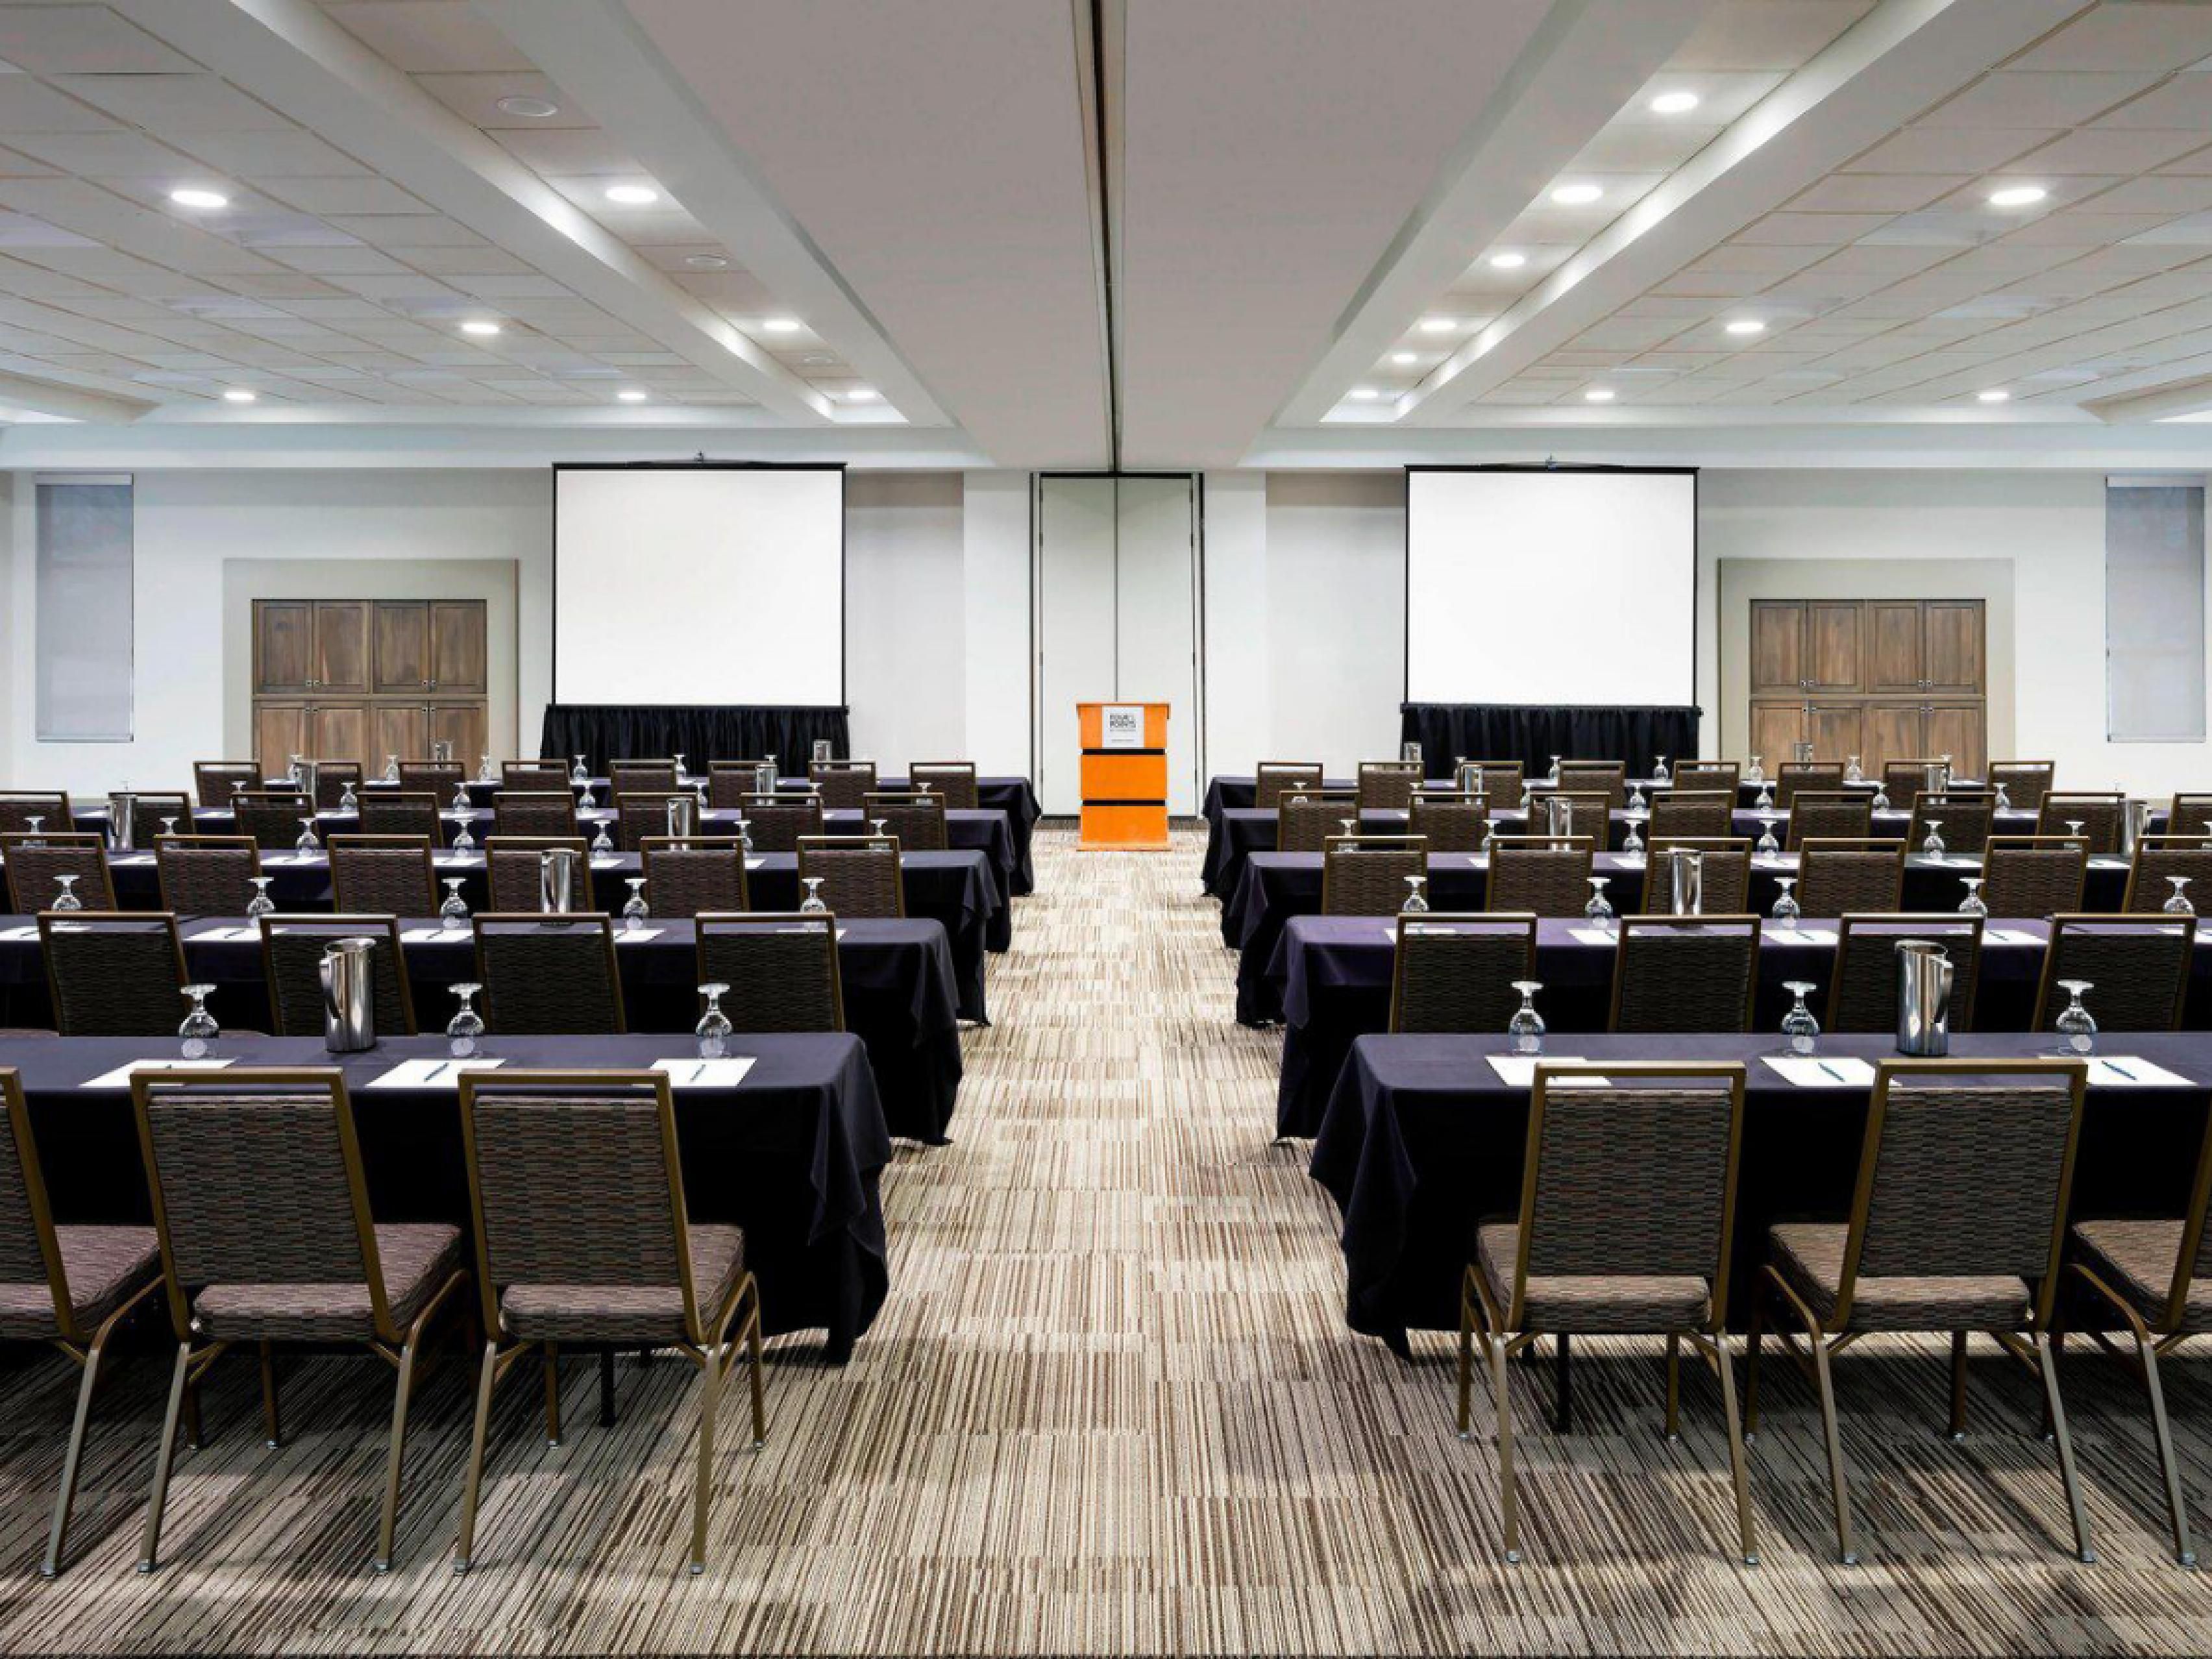 Featuring flexible meeting space arrangements, Holiday Inn Cincinnati - Liberty Way has the ability to host your next meeting from 10 to 250 guests. Please inquire with our sales team for meeting space rental and flexible catering options.